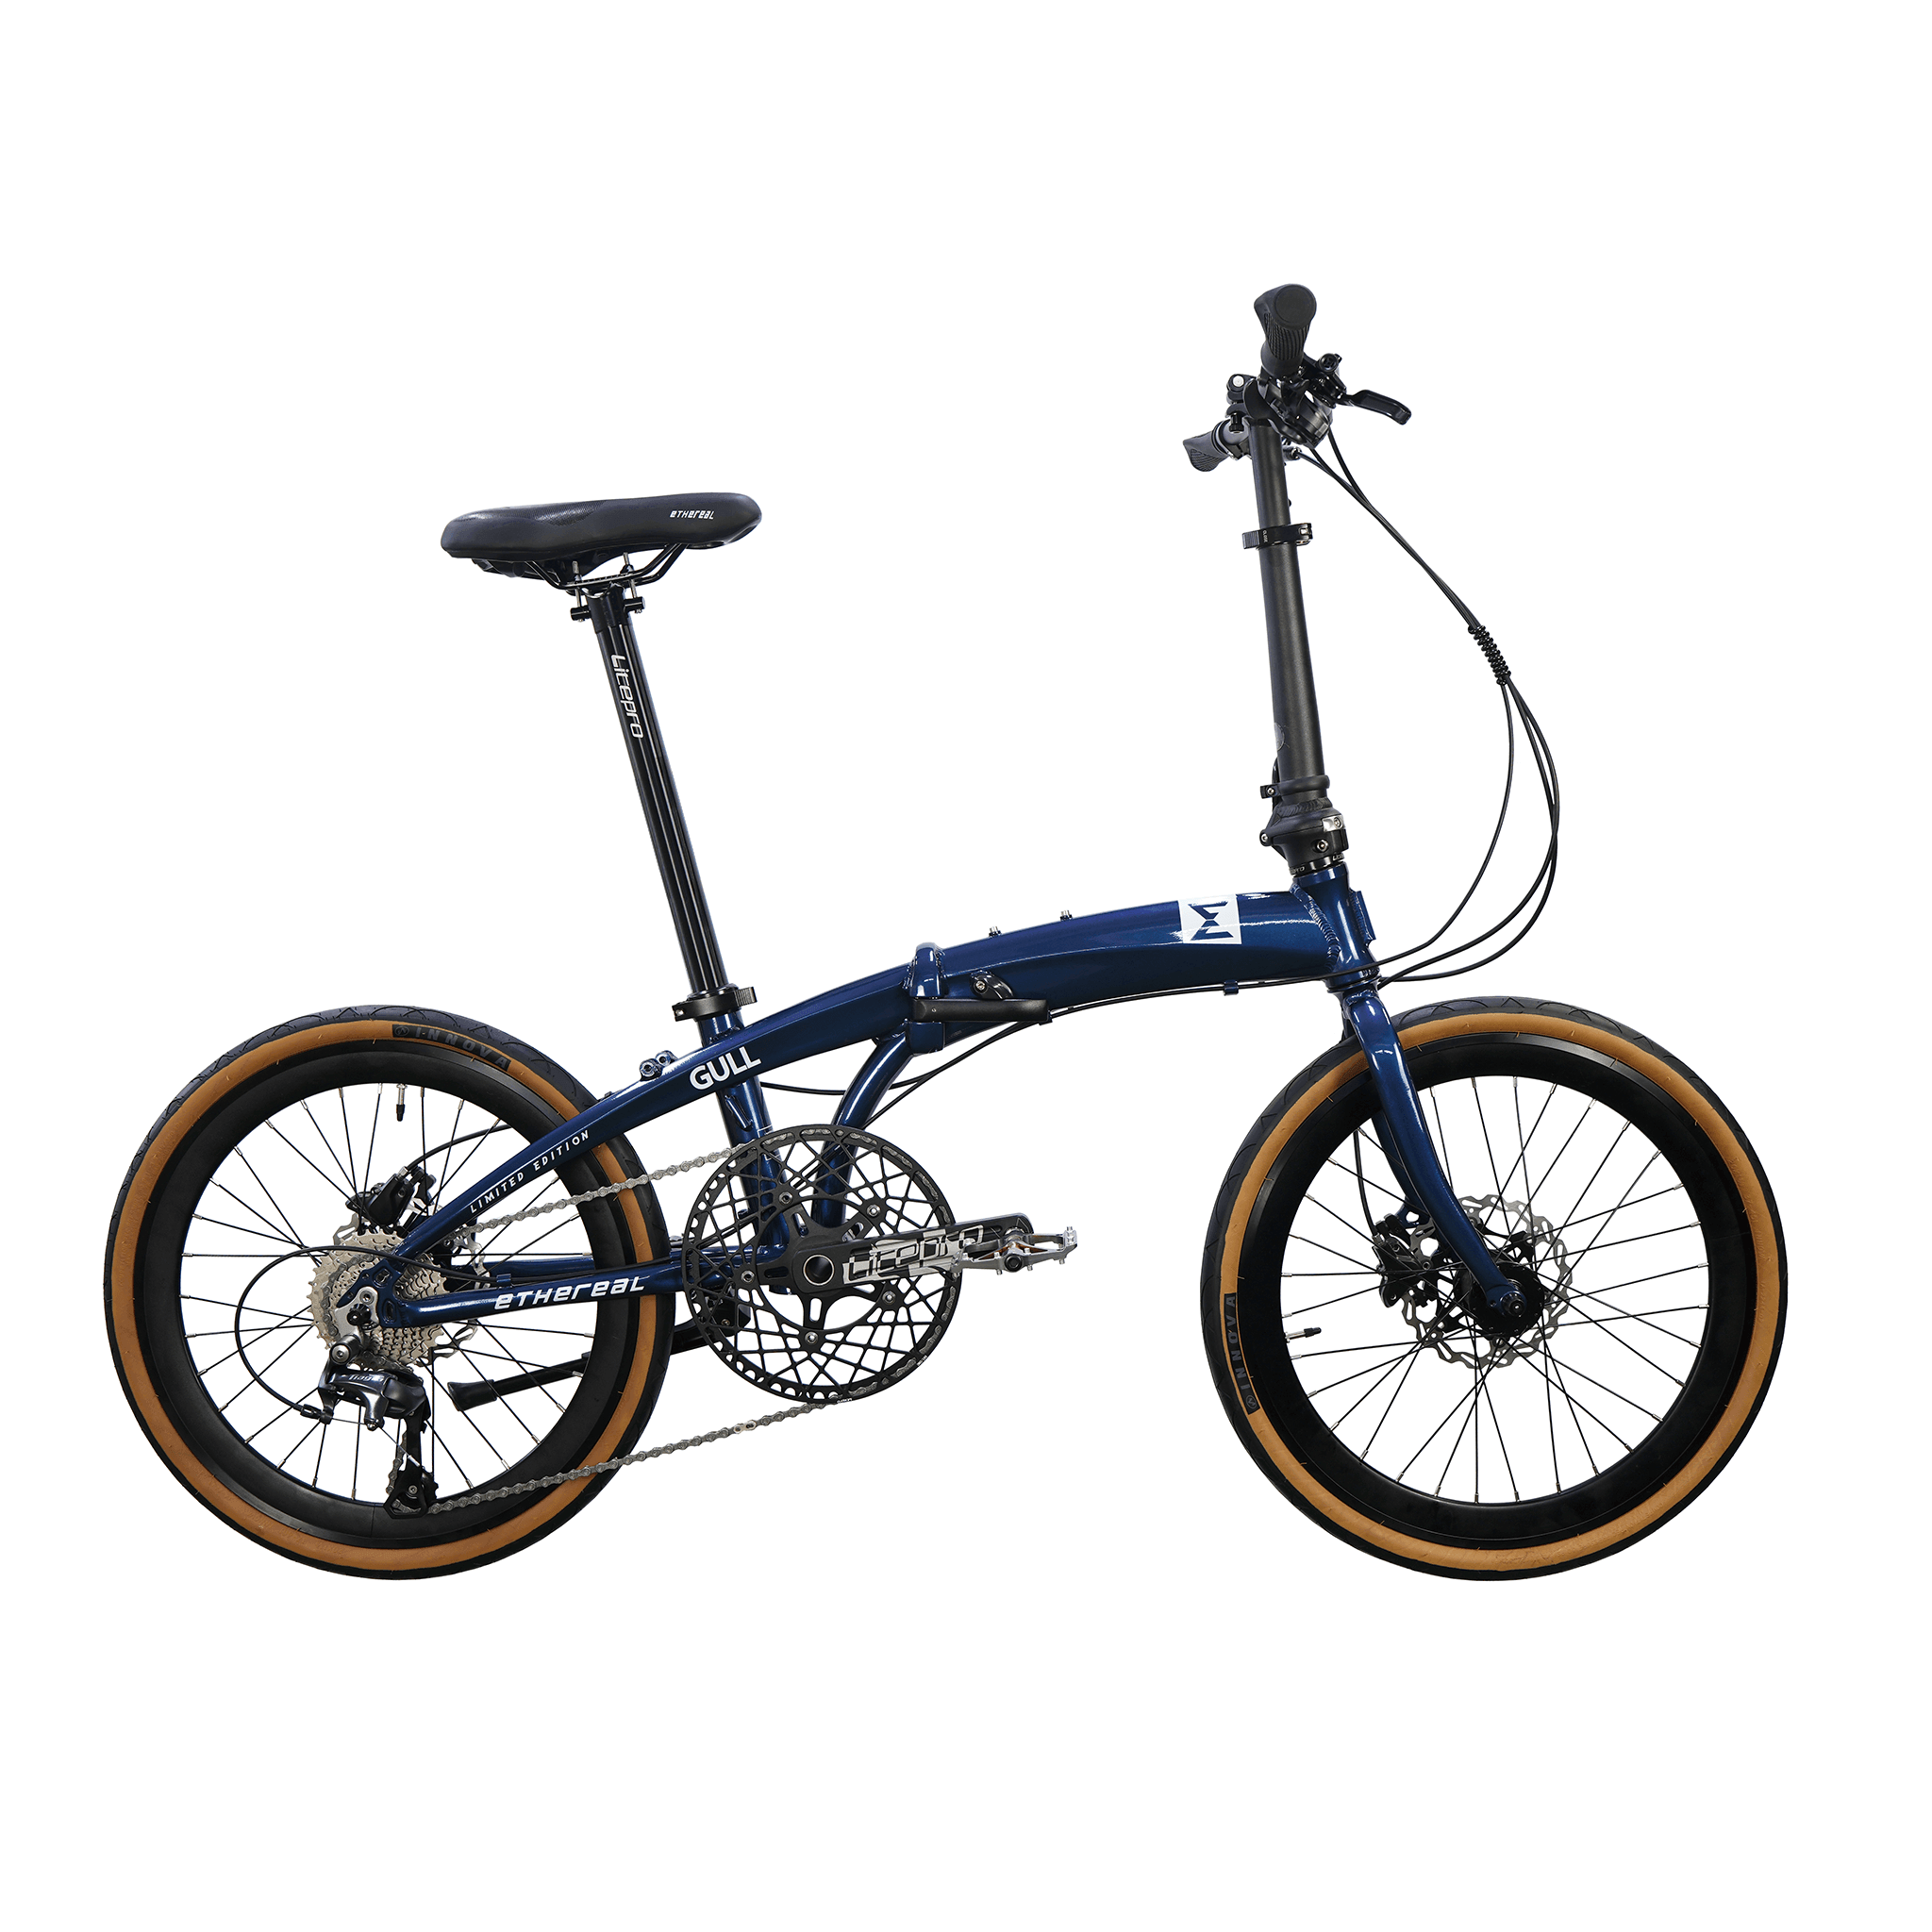 Ethereal Gull Foldable Bicycle - Compact & Versatile | The Bike Atrium